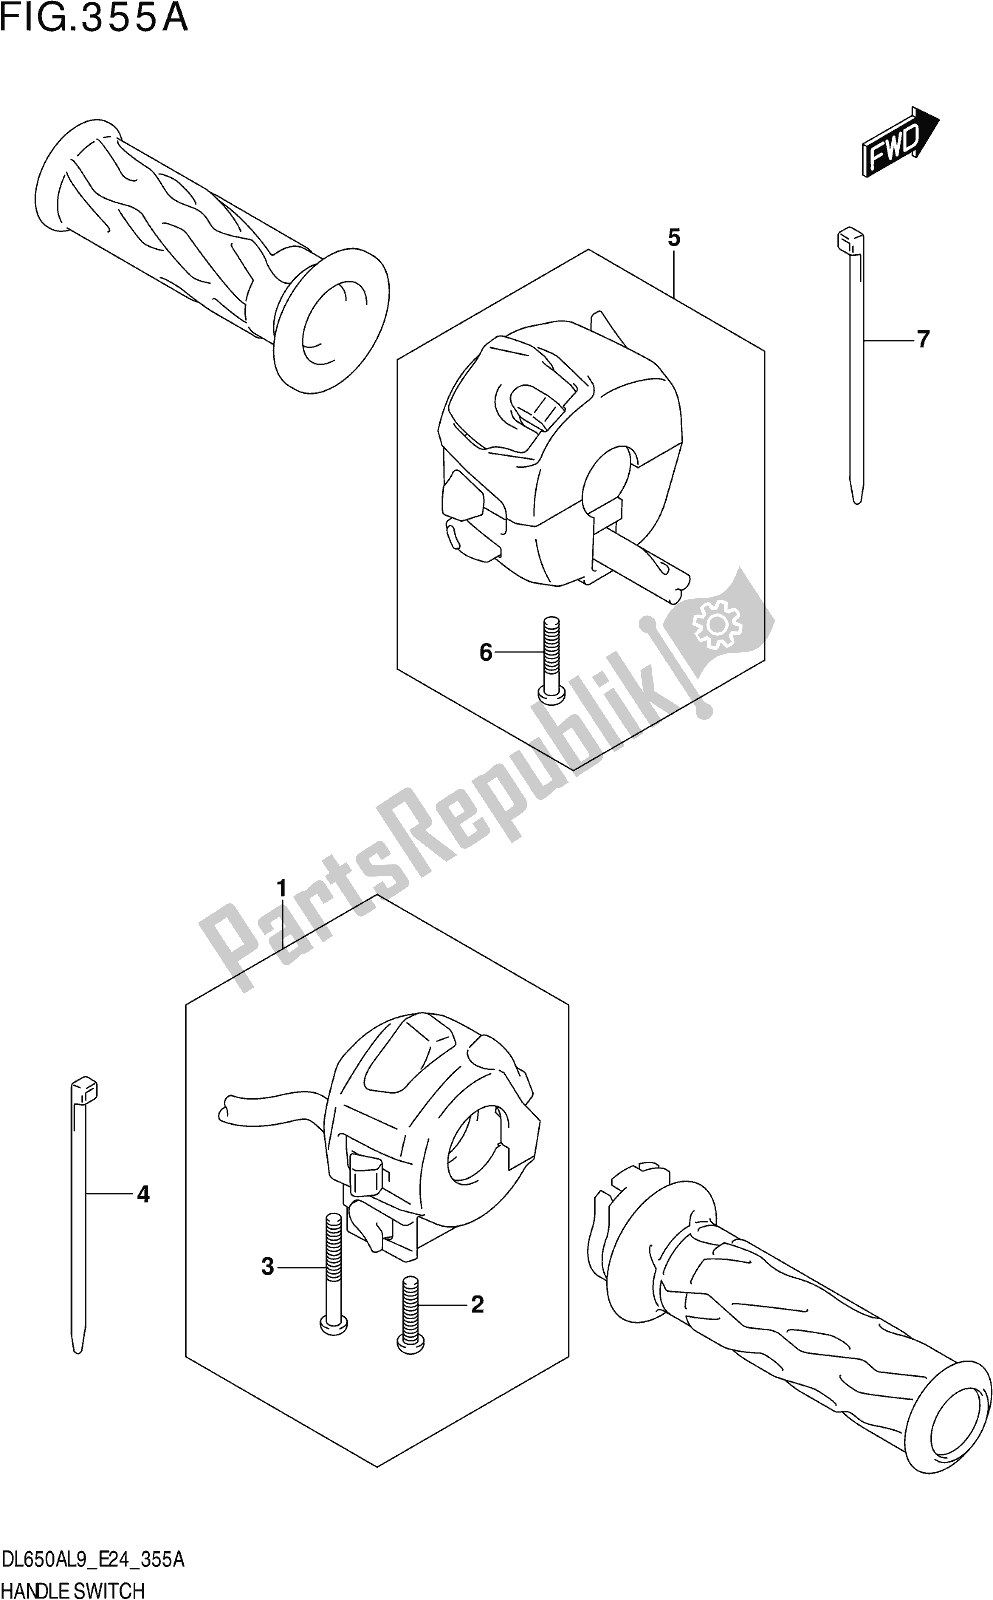 All parts for the Fig. 355a Handle Switch of the Suzuki DL 650A V Strom 2019